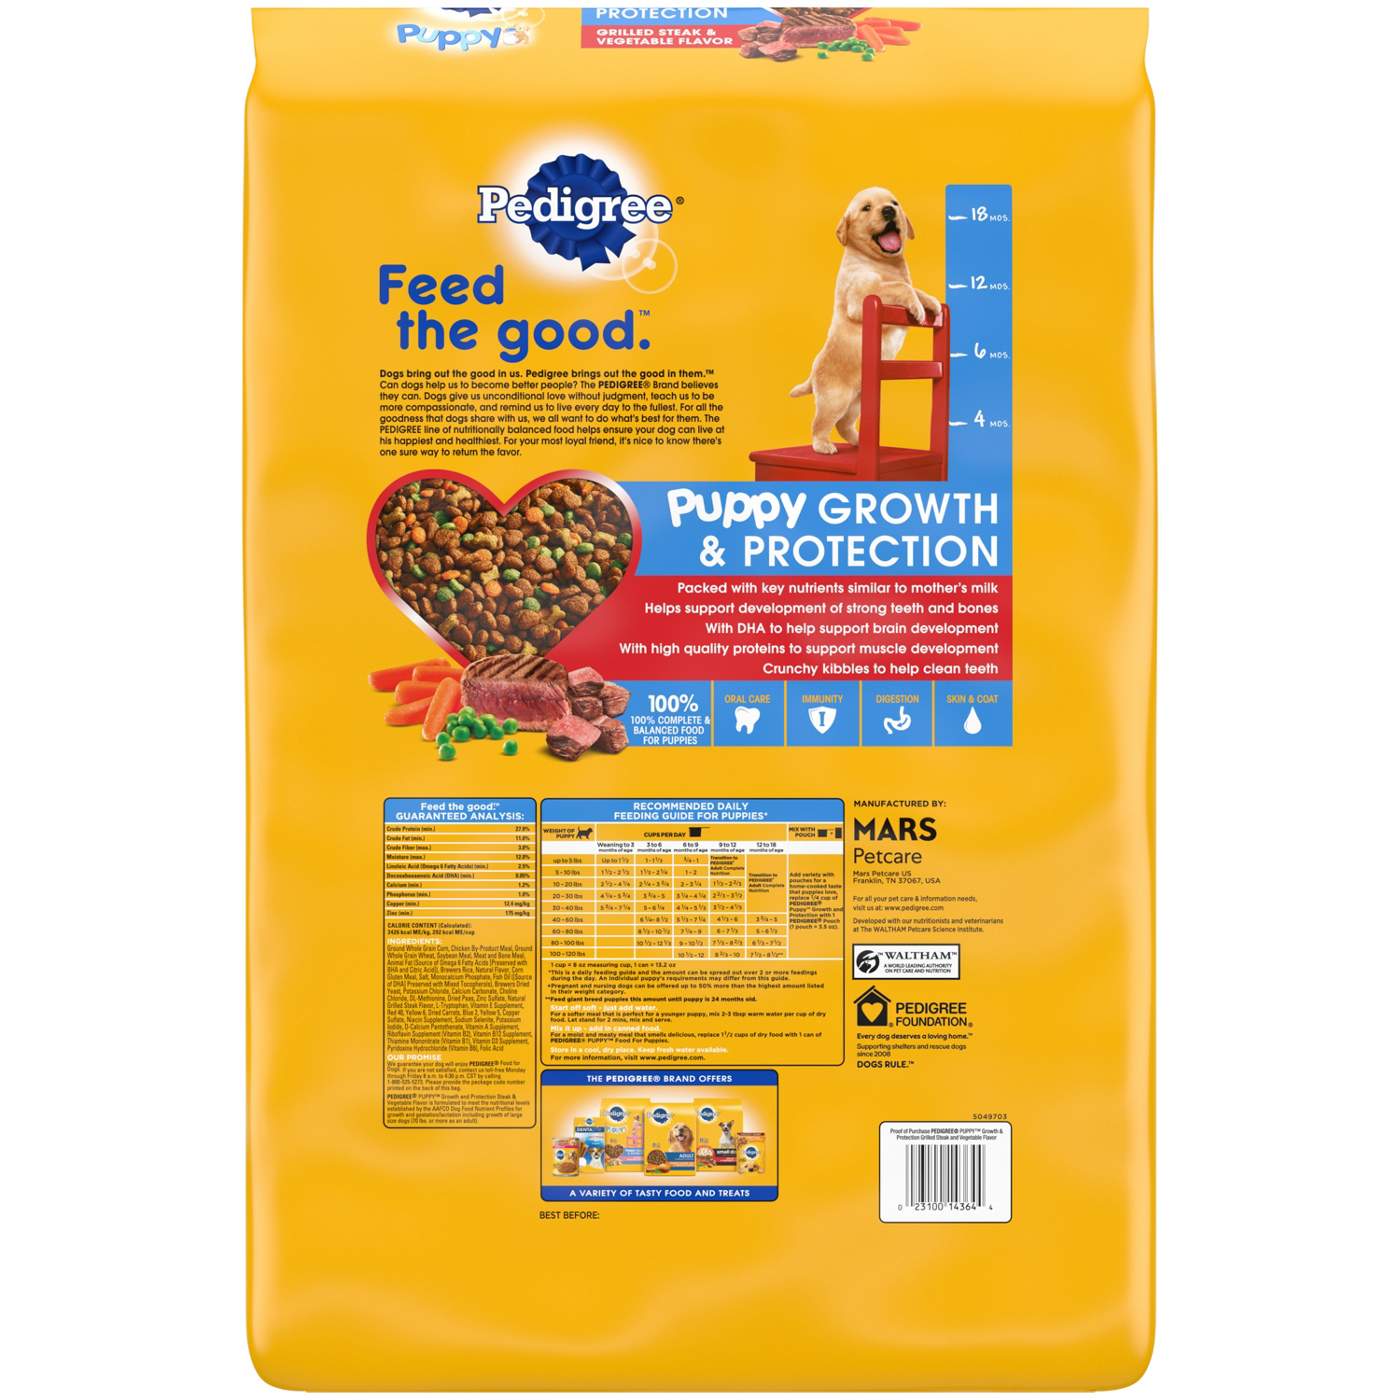 Pedigree Puppy Growth & Protection Grilled Steak & Vegetable Dry Puppy Food; image 4 of 5